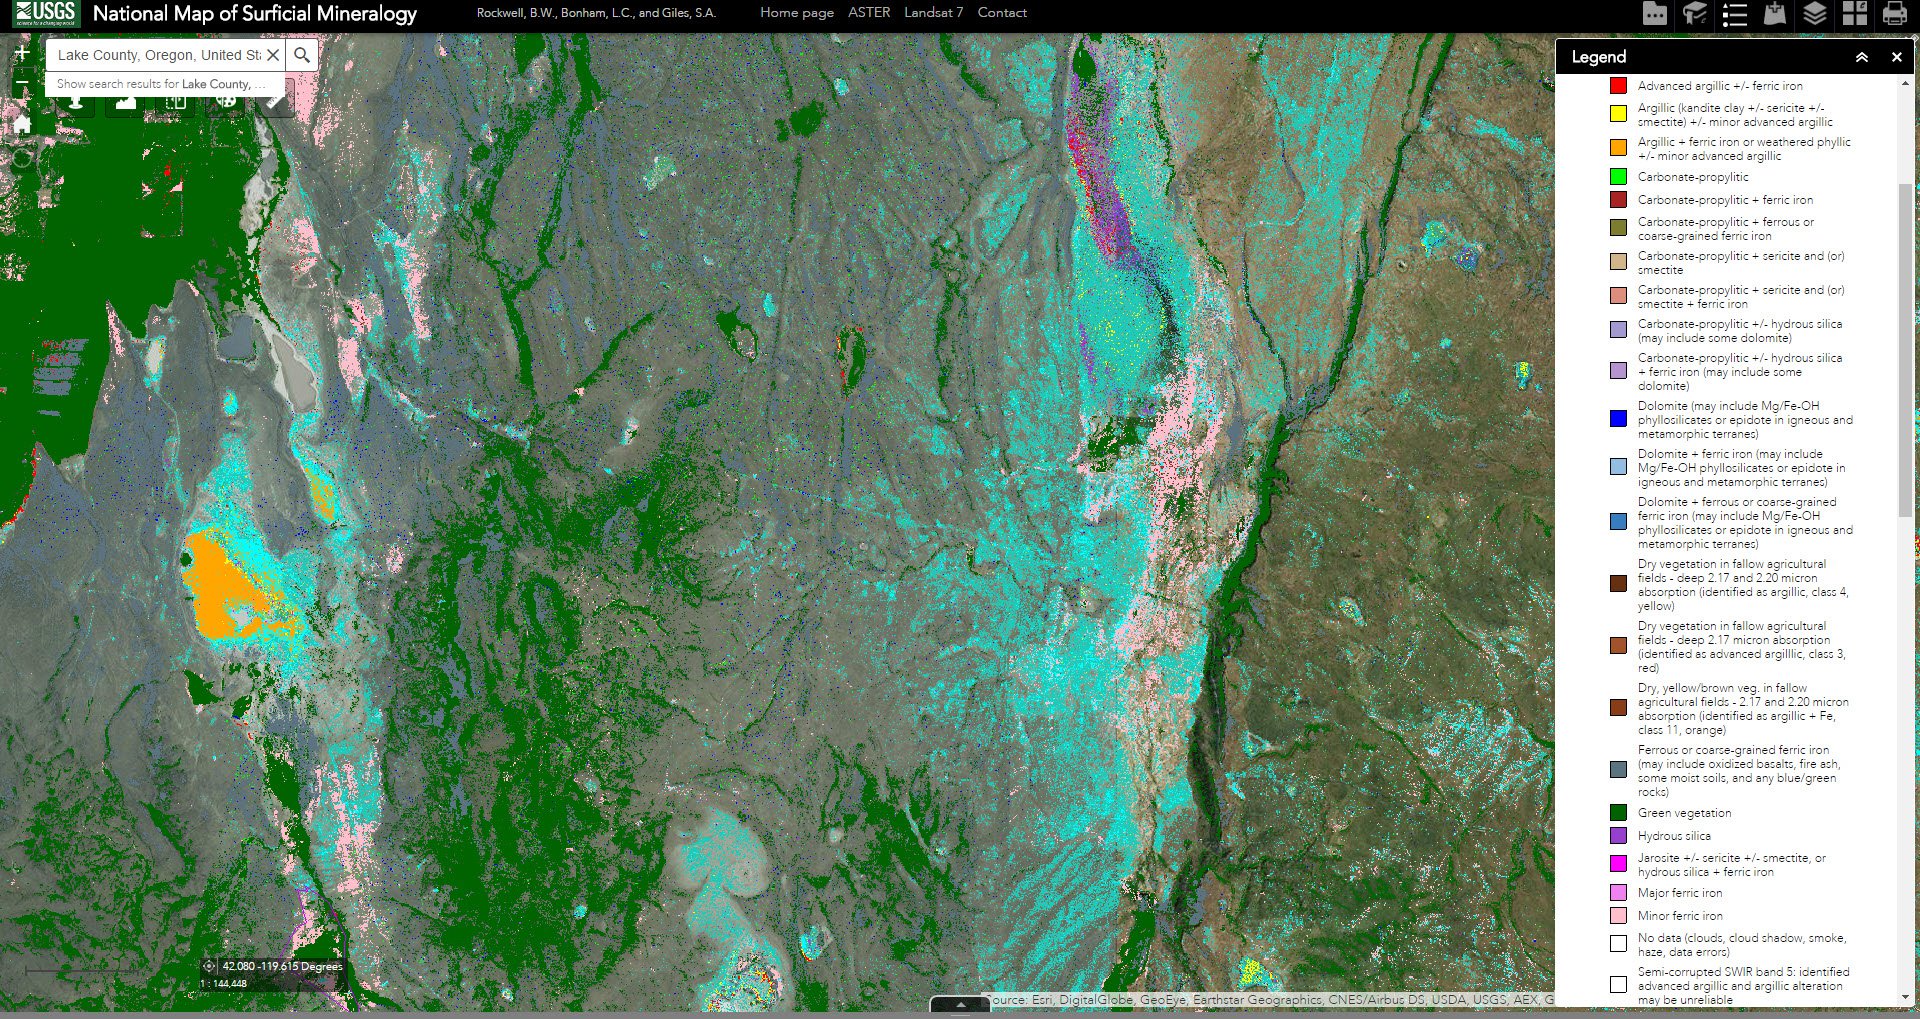 Screen shot of ASTER data over Lake County, Oregon, United States from the National Map of Surficial Mineralogy.